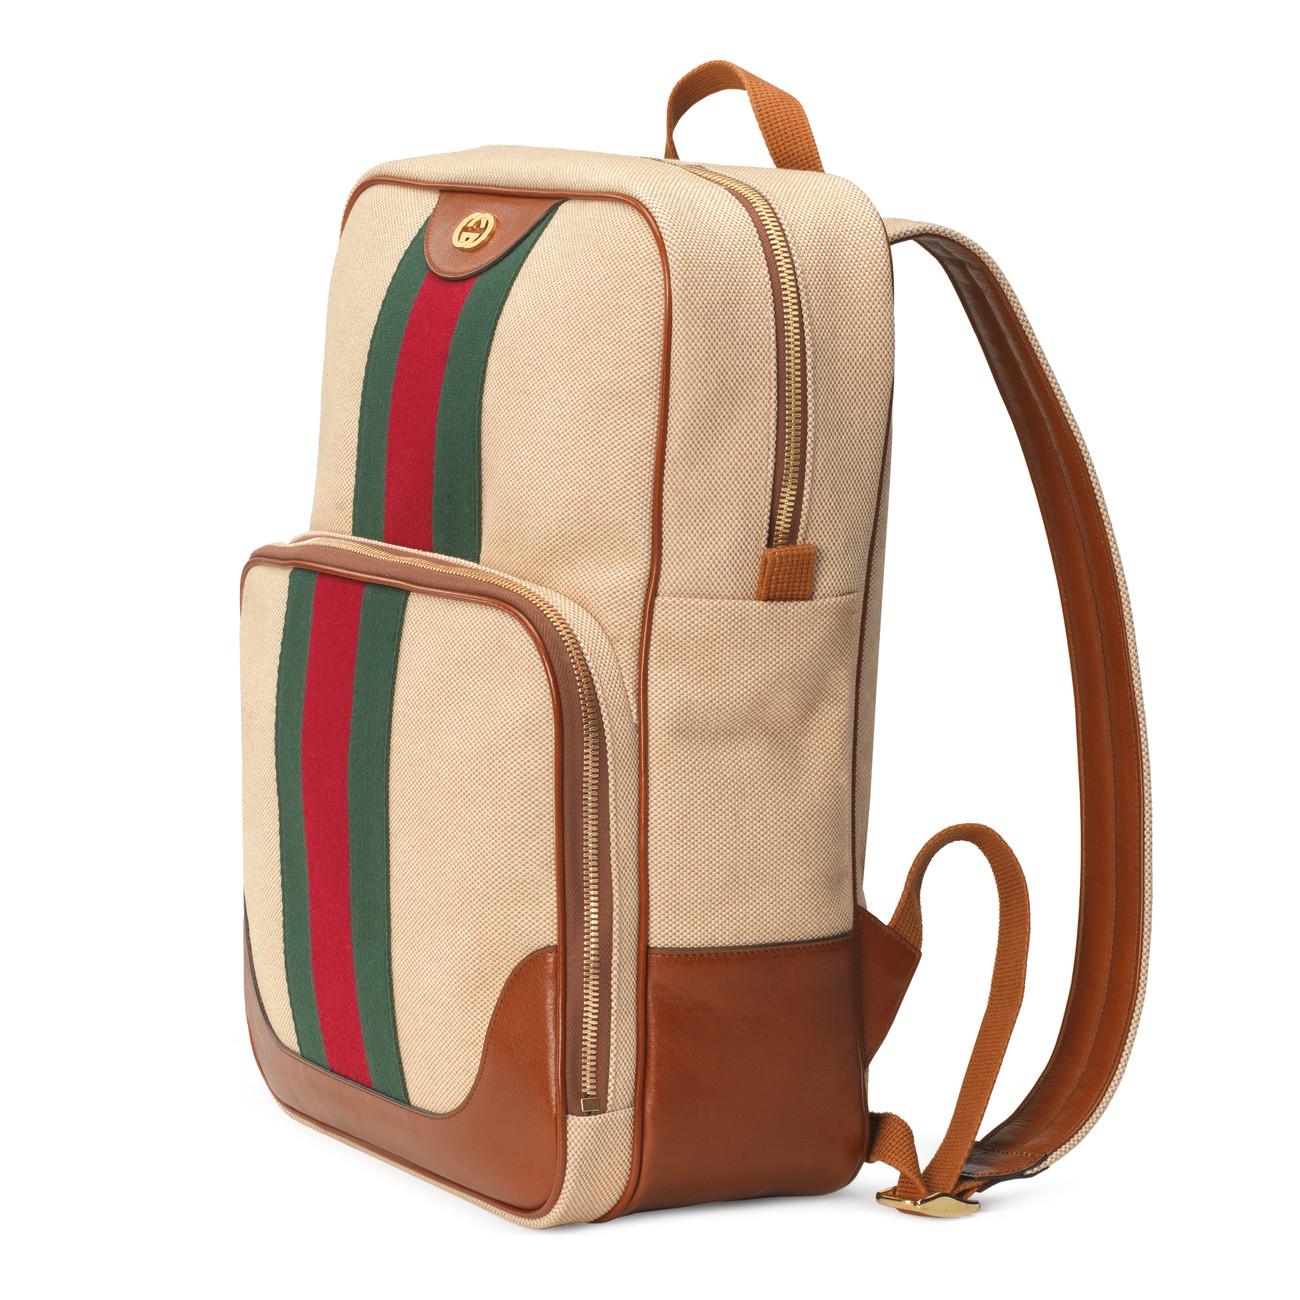 Gucci Vintage Canvas Backpack in Green for Men - Lyst